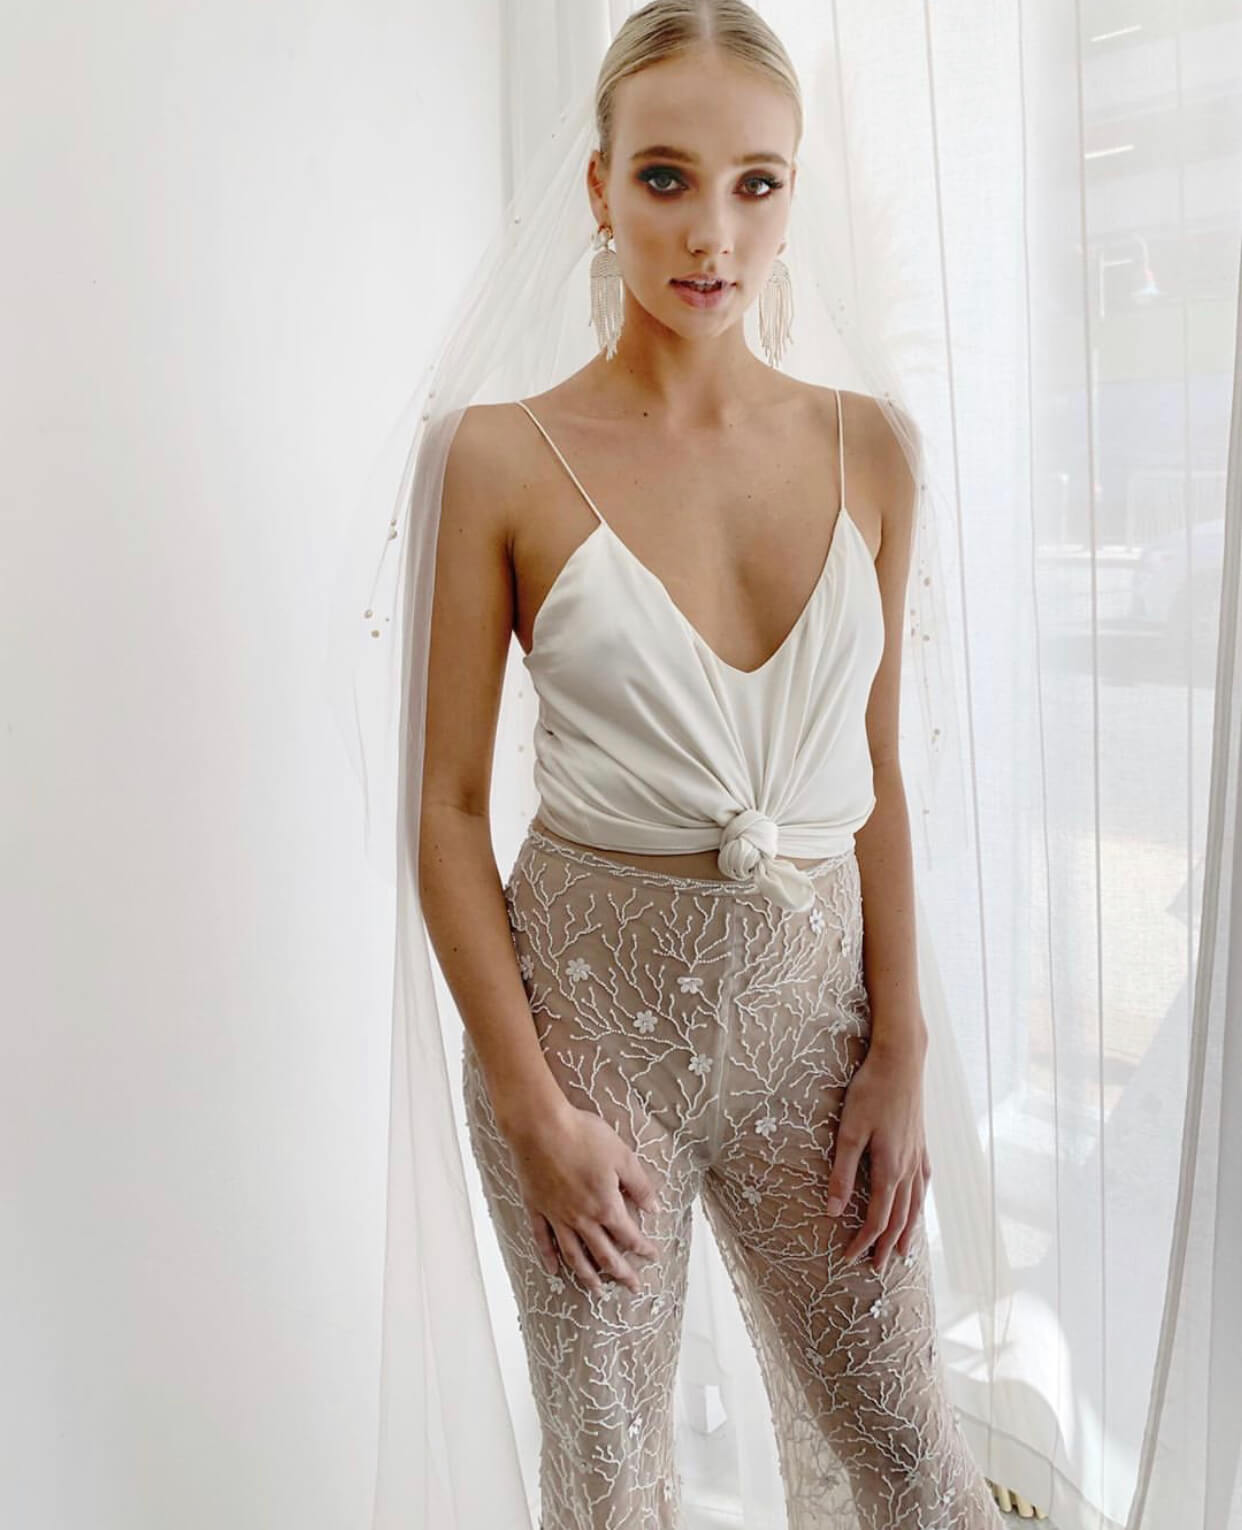 Unconventional Bridal Styles with Wedding Pants Instead of Gown